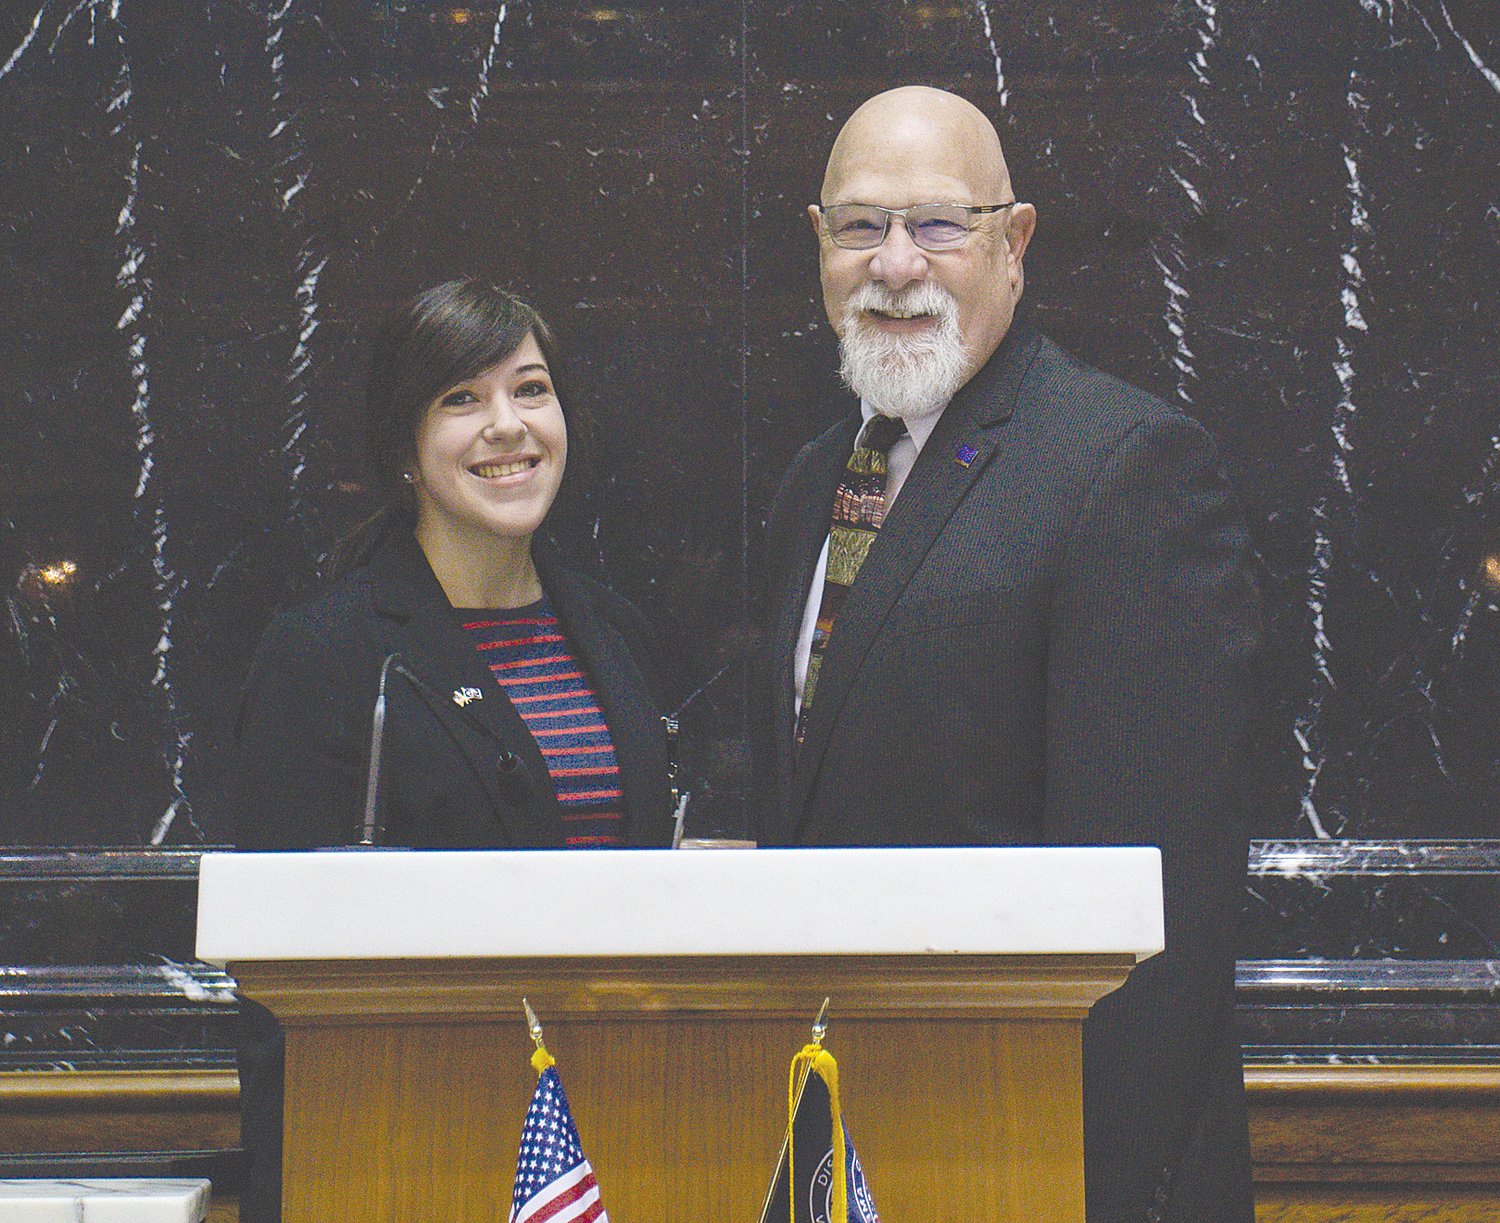 Southmont graduate Erika Belle Adams, left, joins State Rep. Tim Brown (R-Crawfordsville) in the House Chamber at the Indiana Statehouse on Wednesday. Adams is interning with the House of Representatives during the 2020 legislative session.